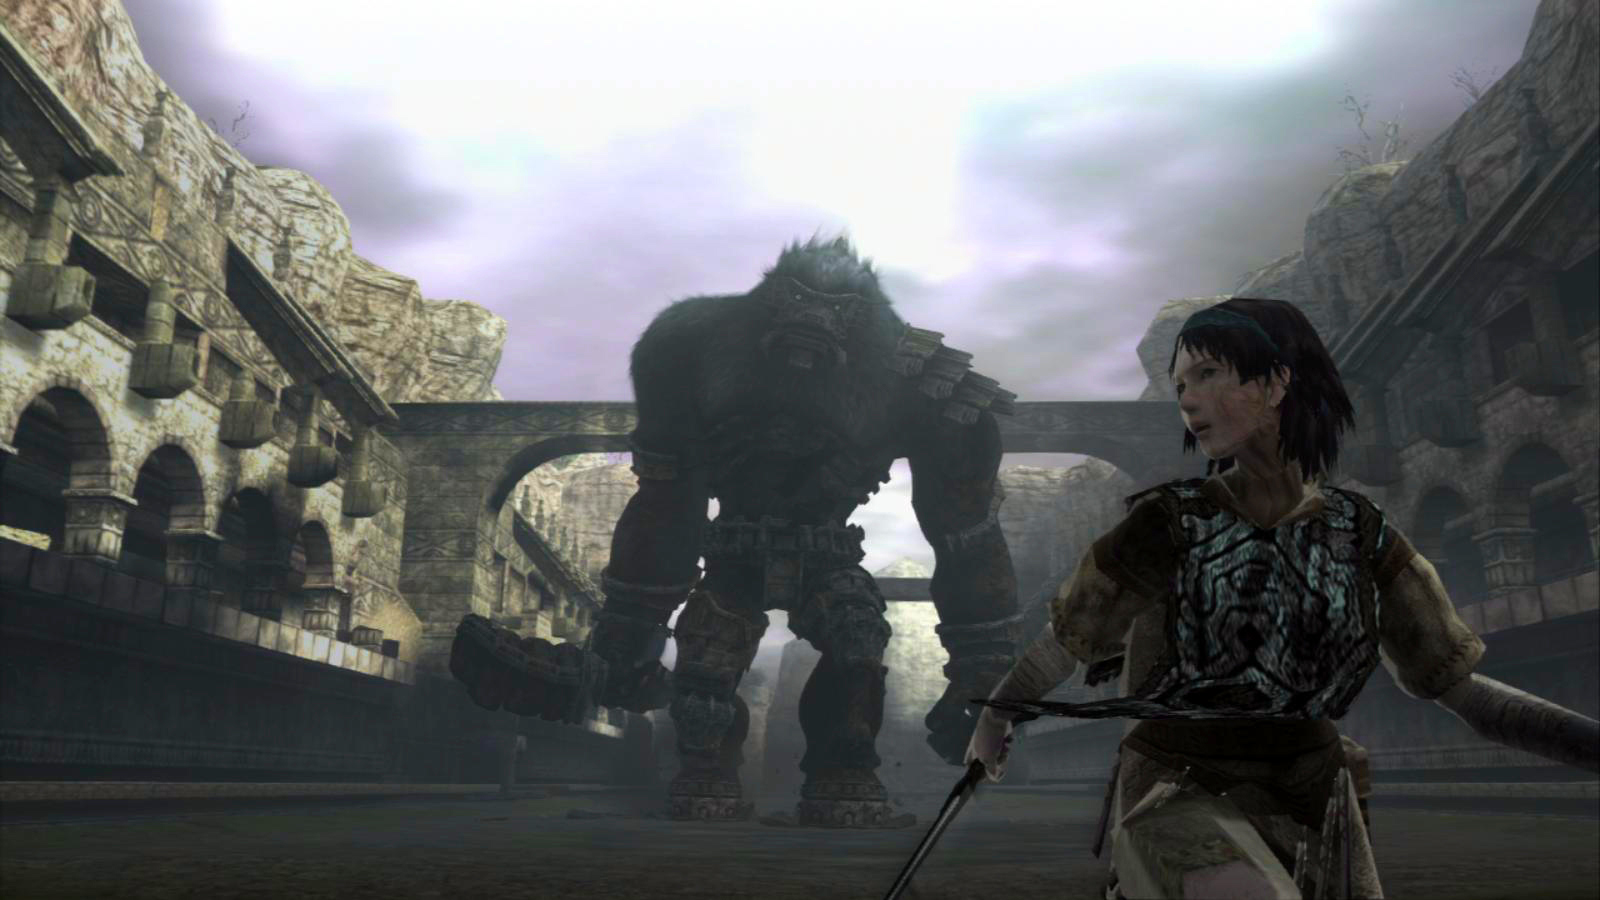 shadow of the colossus ps3